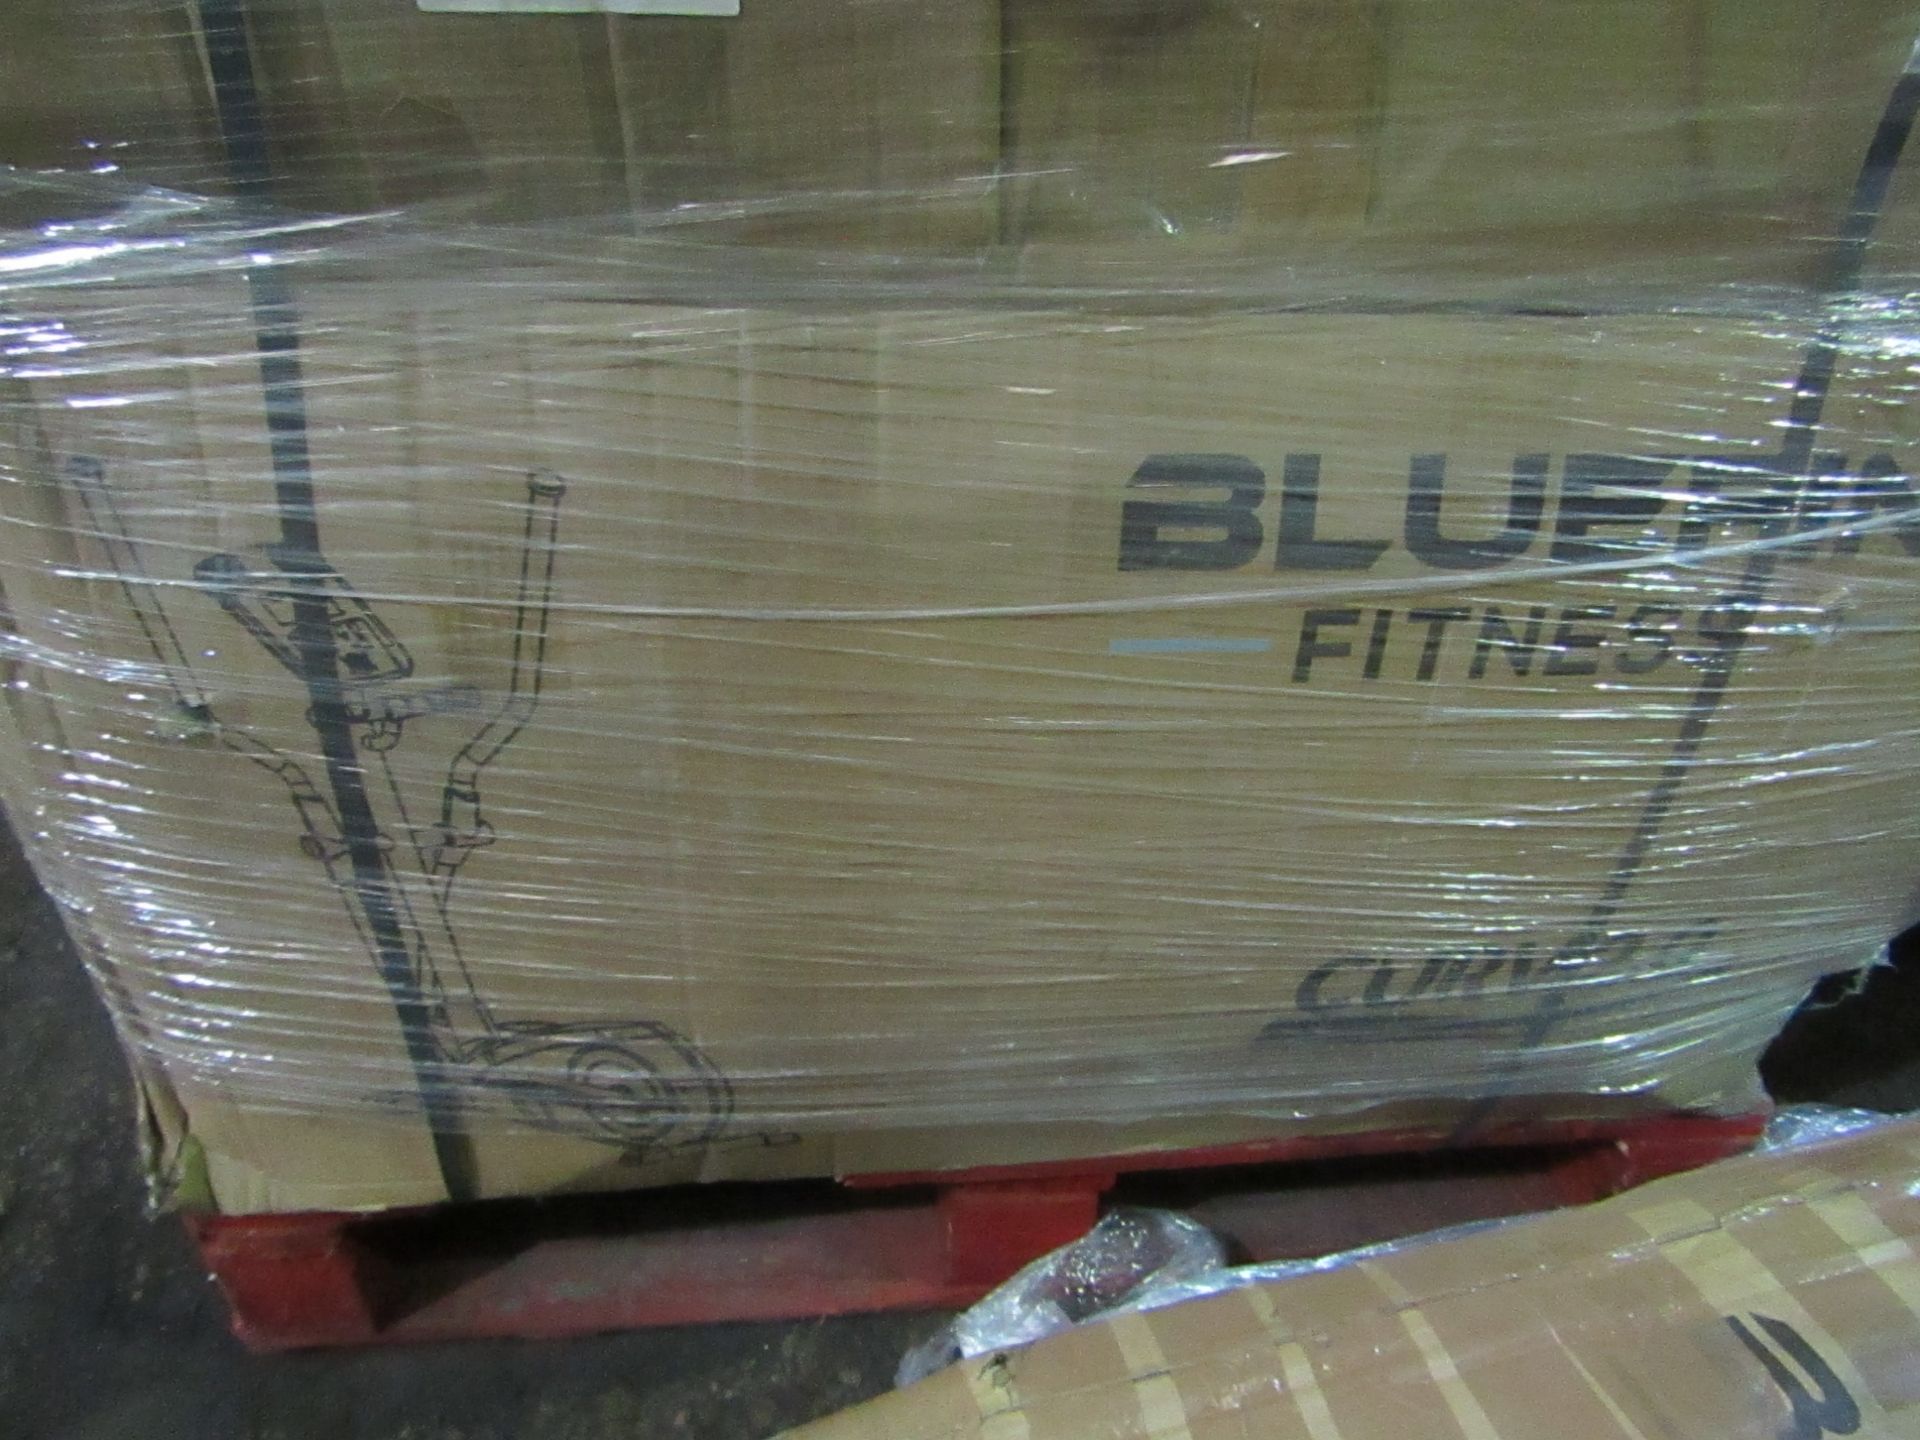 Bluefin Fitness Curv 2.0 Elliptical Air-Walker Cross Trainer and Step Machine RRP ¶œ599.00 - Image 2 of 2